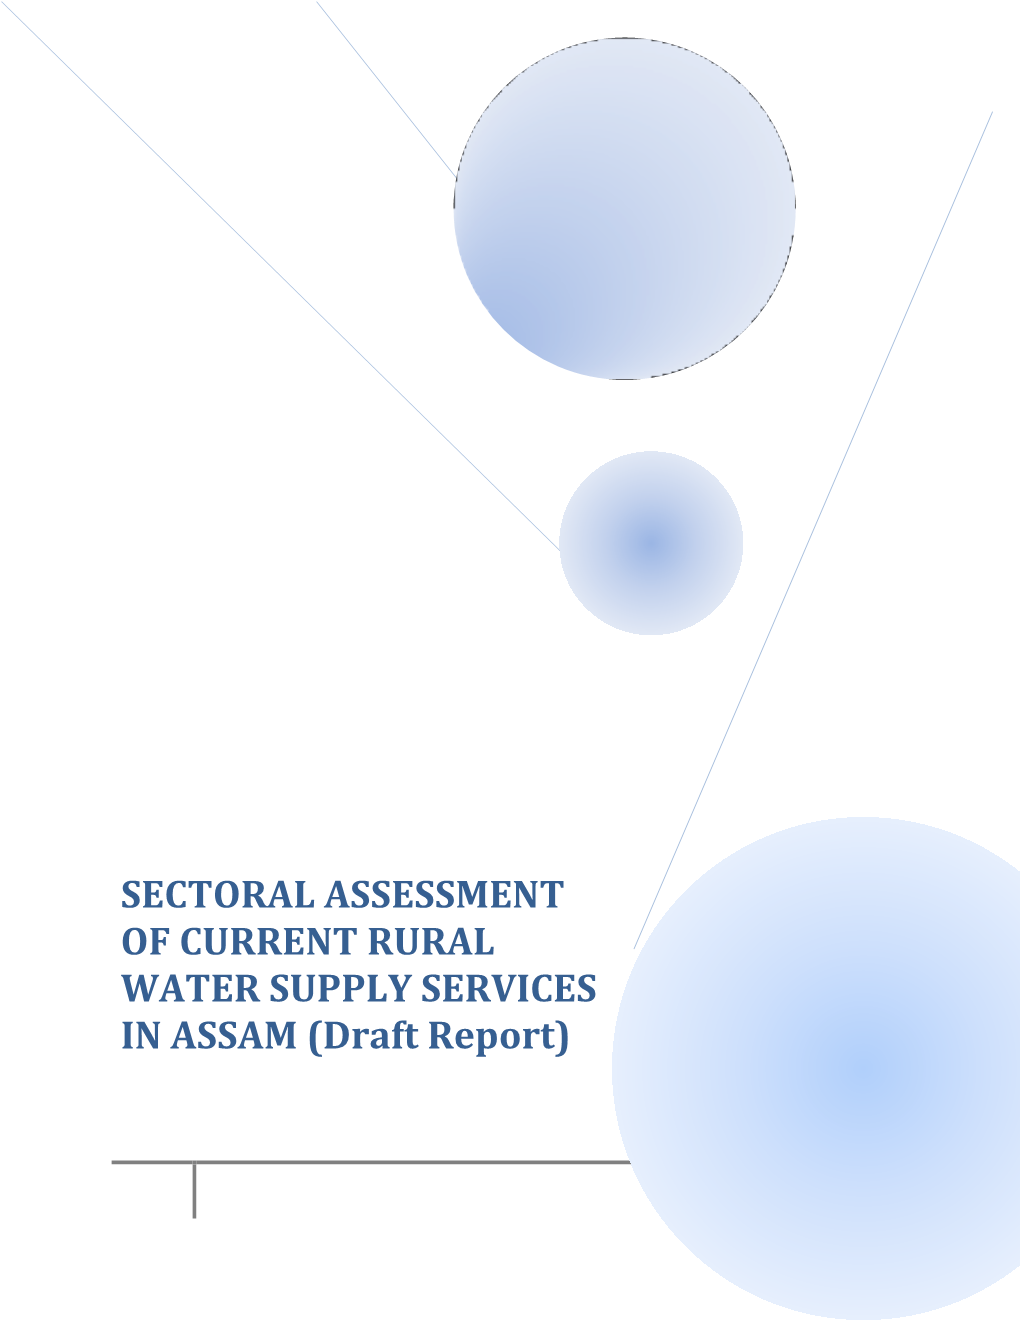 SECTORAL ASSESSMENT of CURRENT RURAL WATER SUPPLY SERVICES in ASSAM (Draft Report)